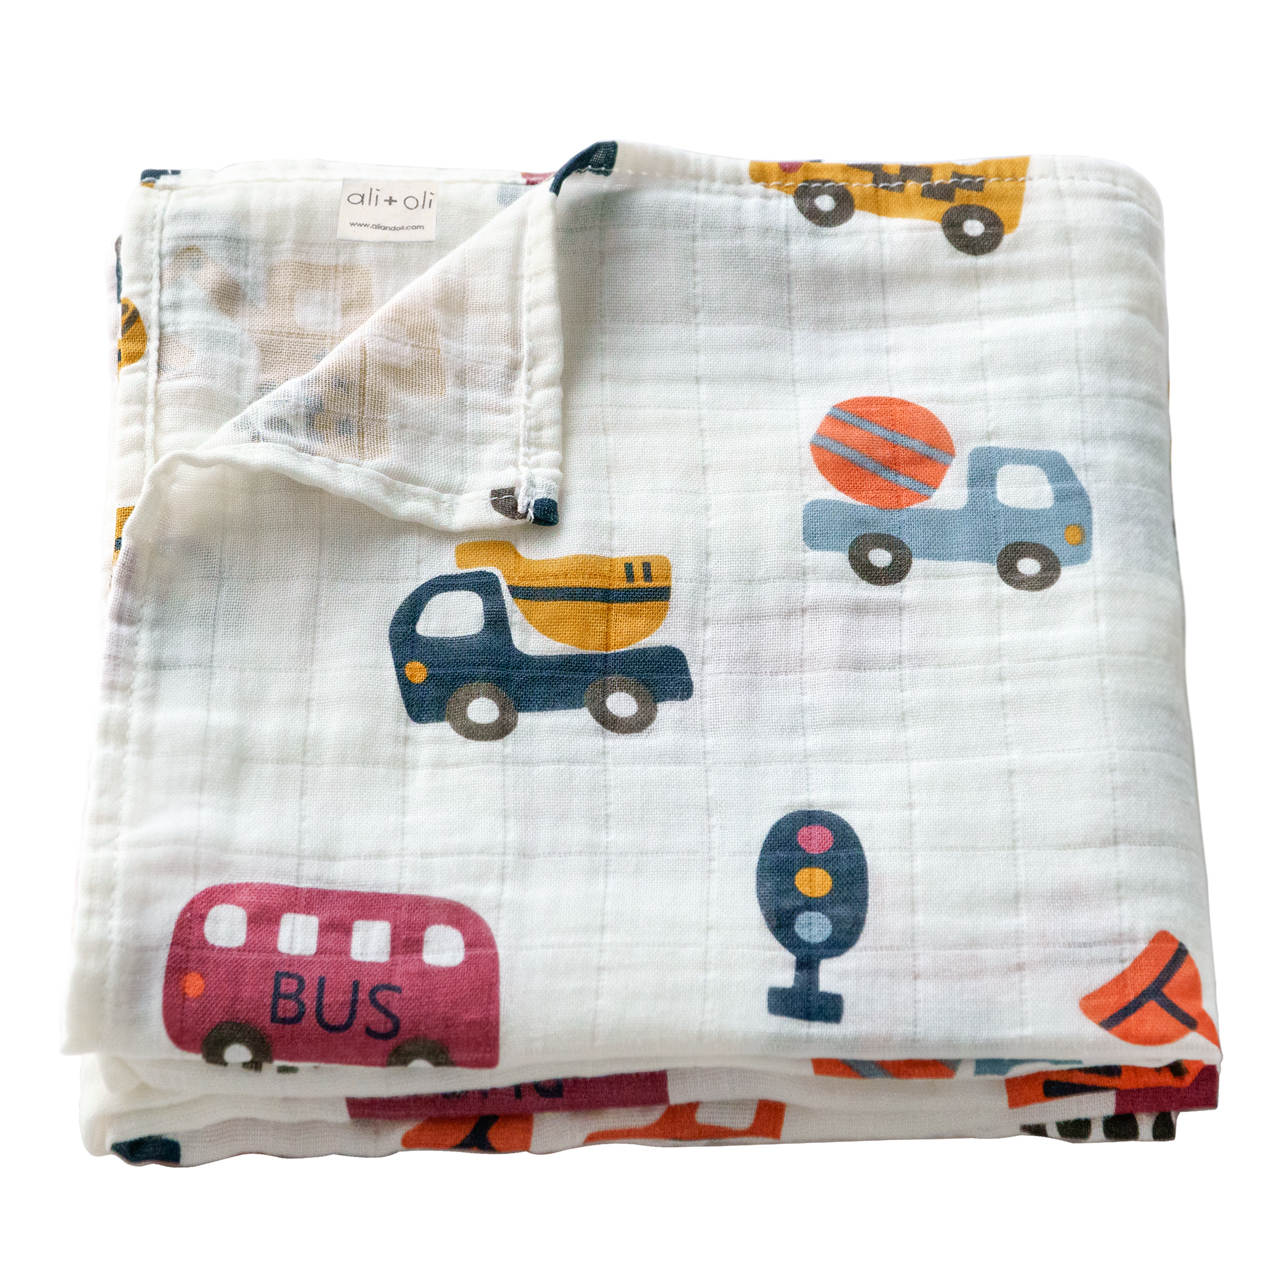 Ali+Oli baby brand swaddle blanket for baby with cute transportation icons